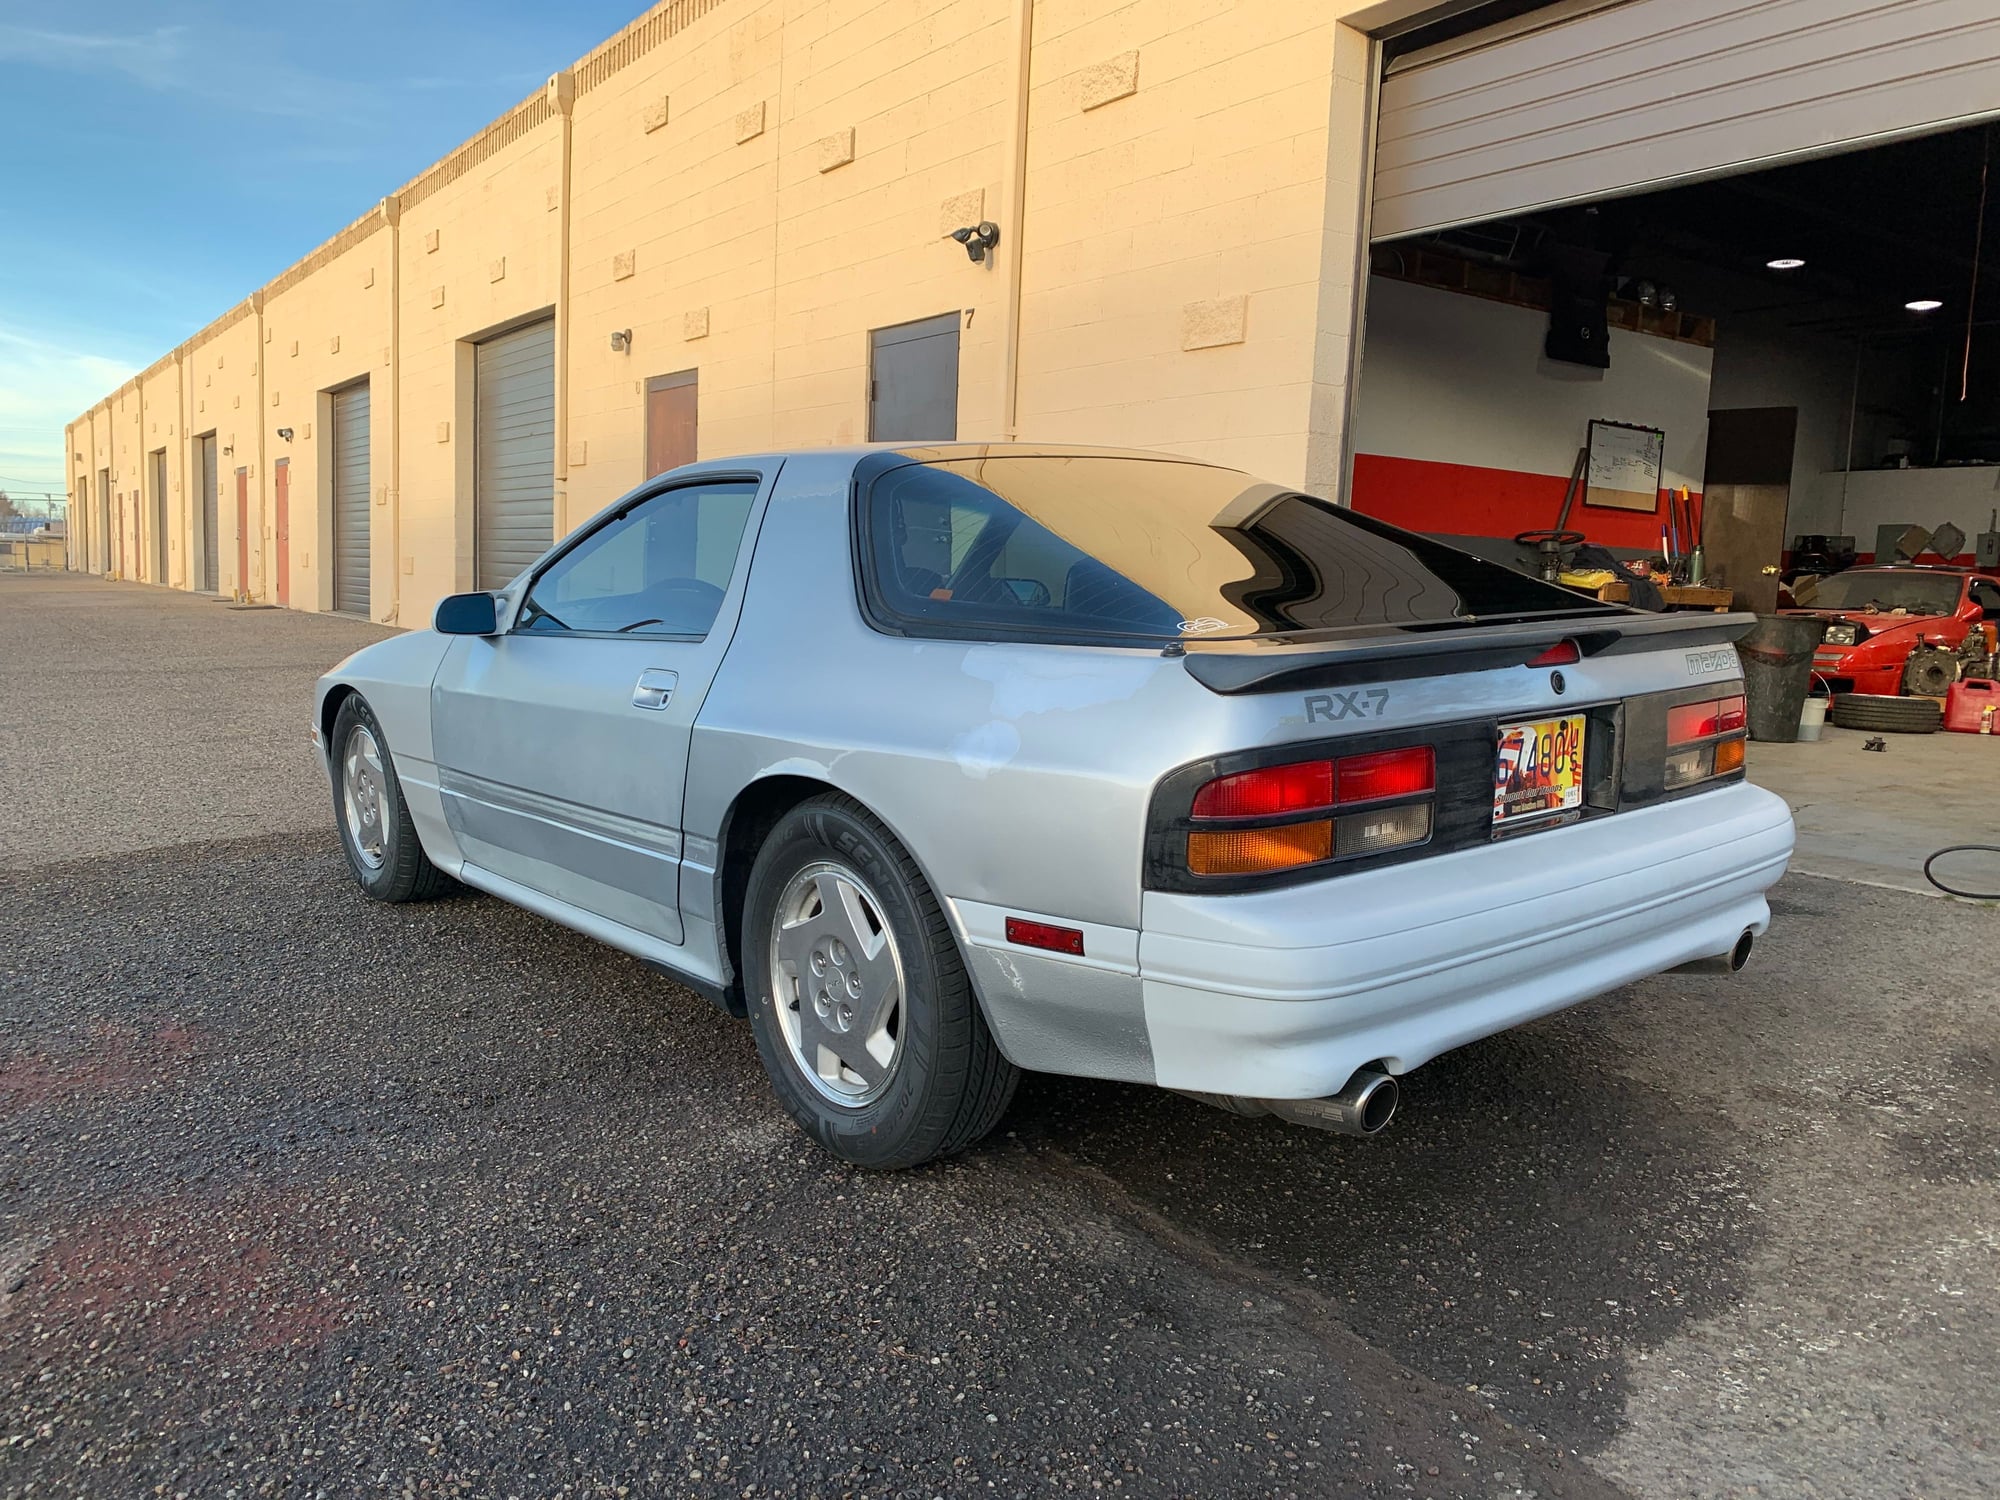 1986 Mazda RX-7 - Freshly rebuilt 1986 FC Rx-7 - Used - VIN JM1FC3318G0130254 - 121,000 Miles - Other - 2WD - Manual - Coupe - Silver - Albuquerque, NM 87123, United States